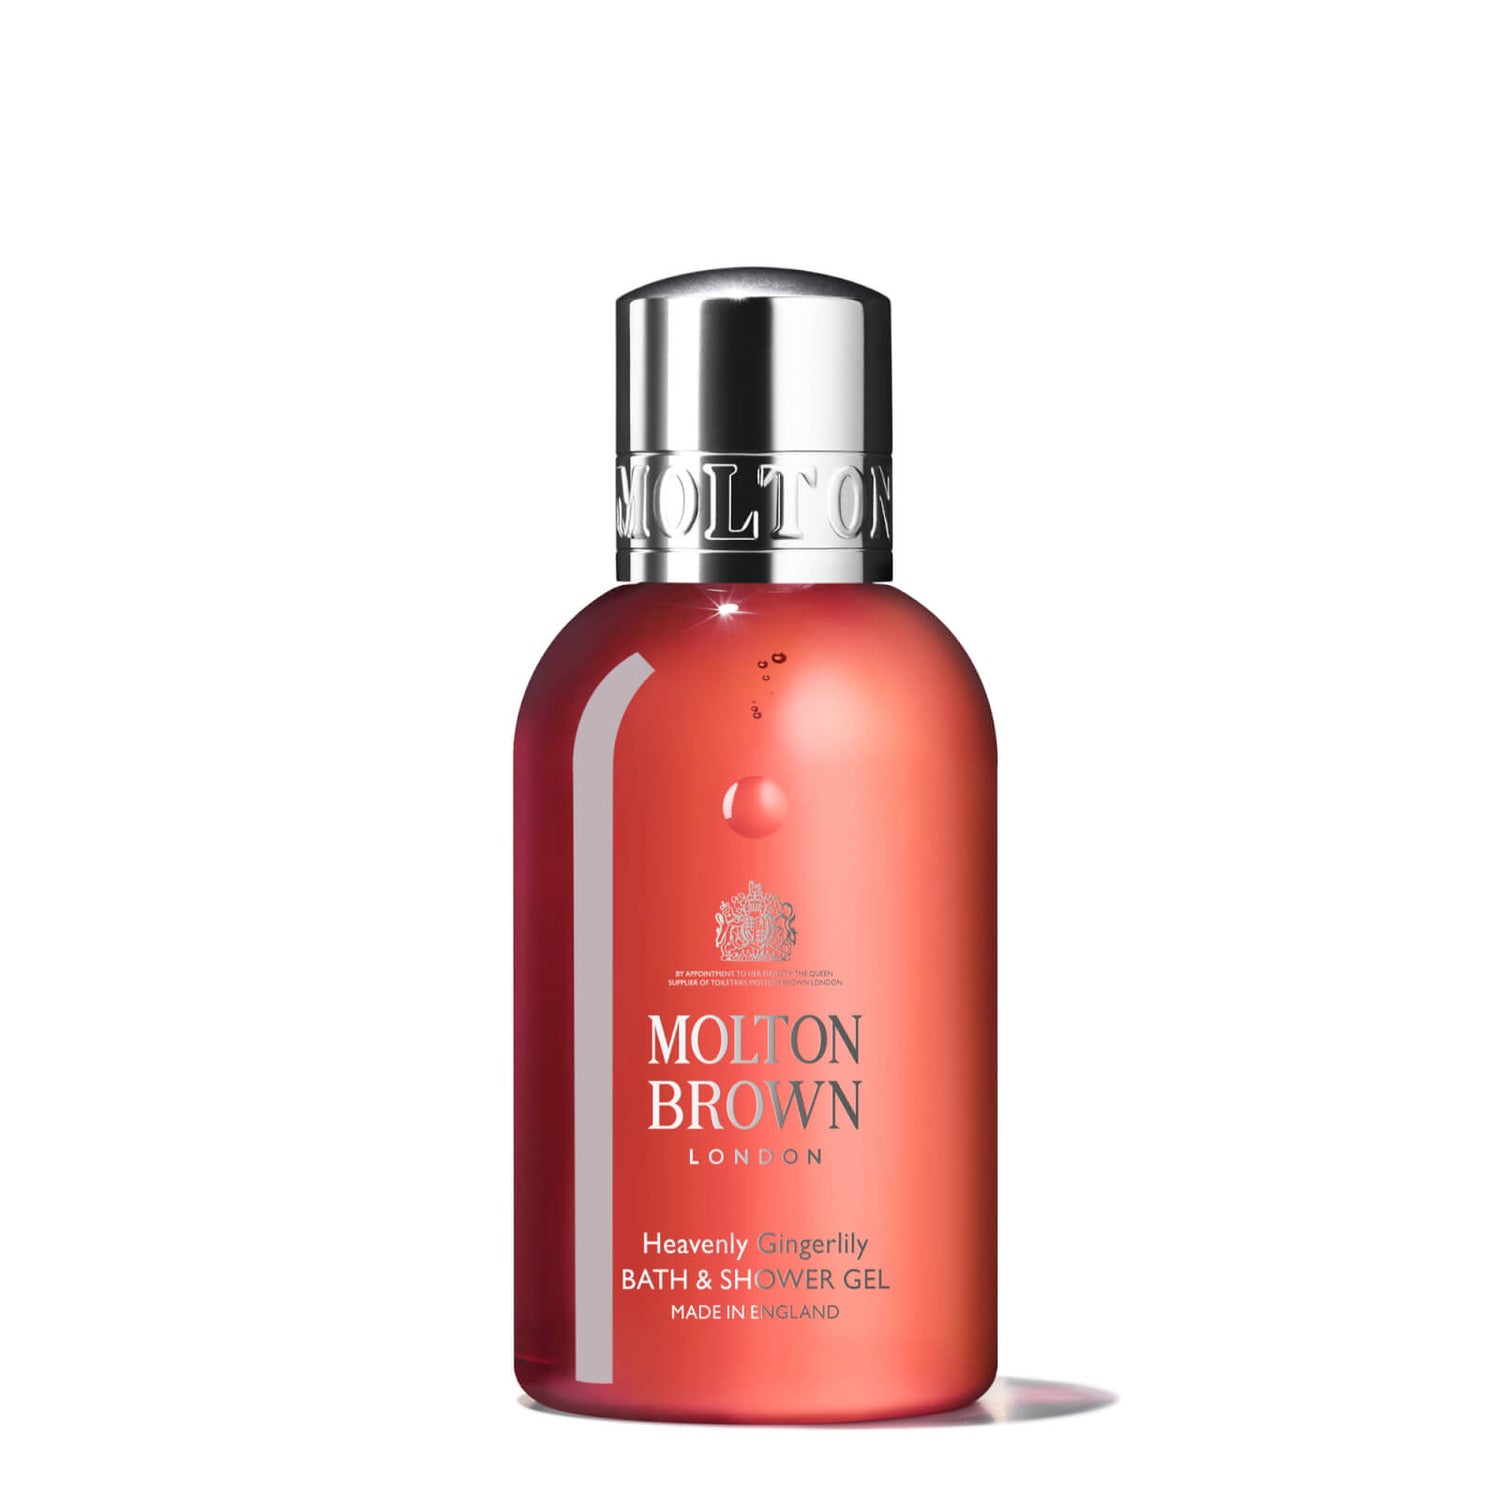 Molton Brown Heavenly Gingerlily Bath and Shower Gel 100ml (Worth $14.00)